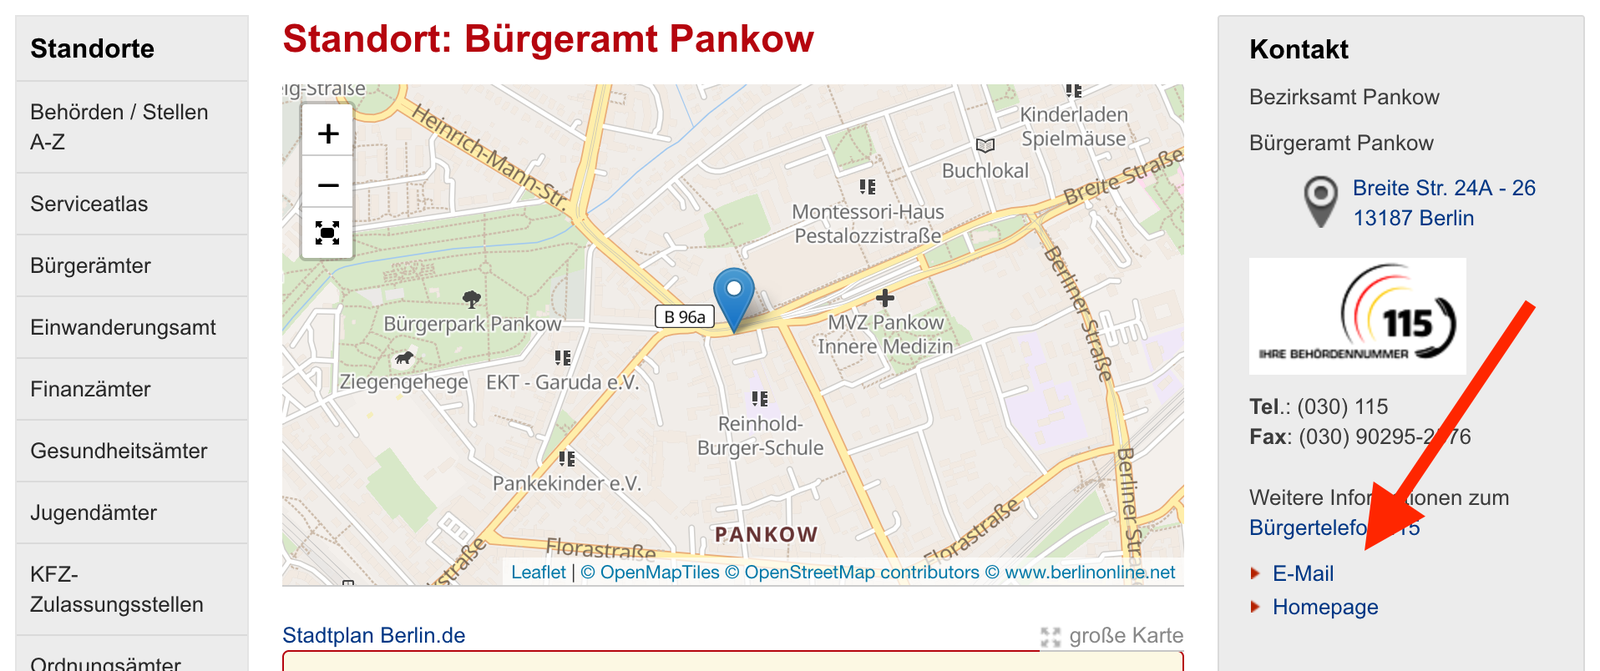 Where to find the email of a Berlin Bürgeramt